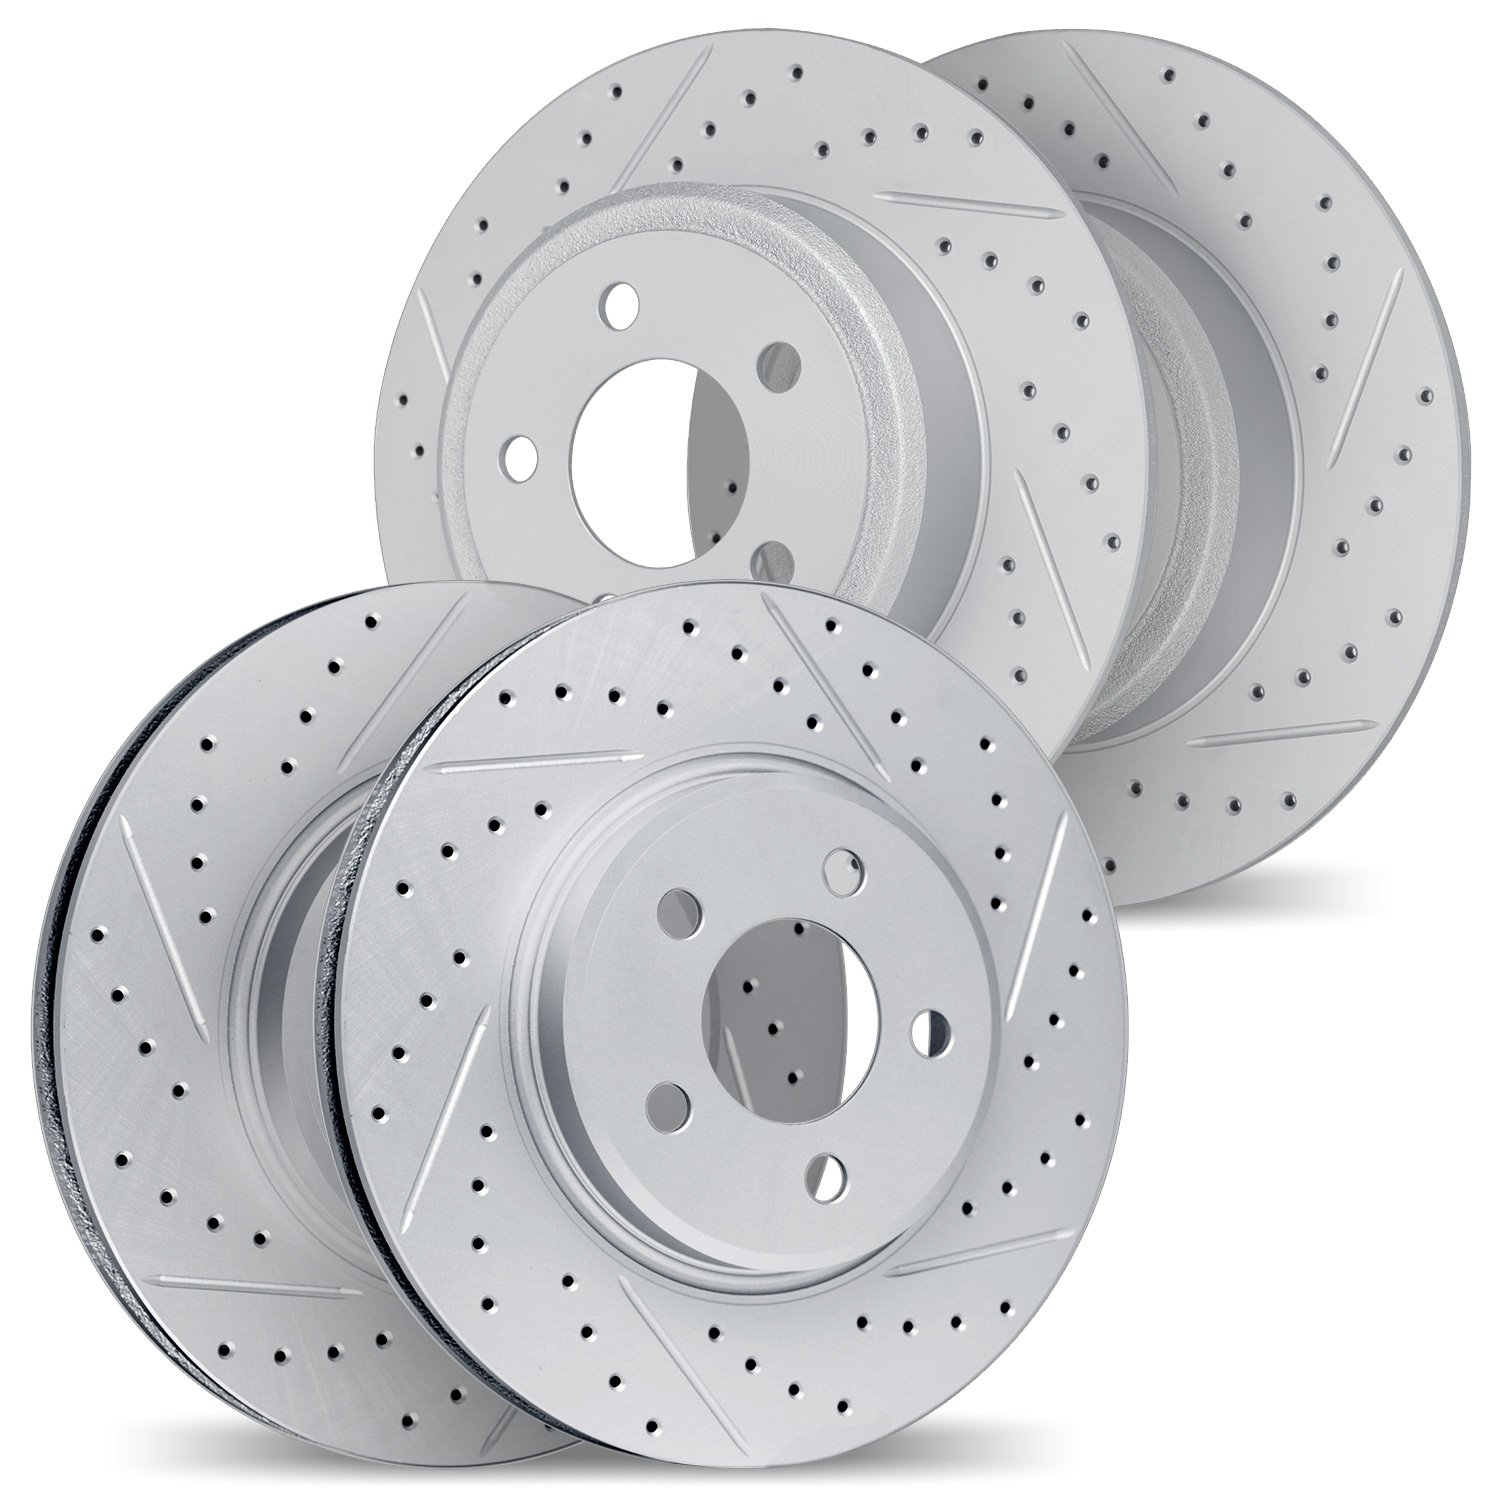 2004-45011 Geoperformance Drilled/Slotted Brake Rotors, 1997-2004 GM, Position: Front and Rear